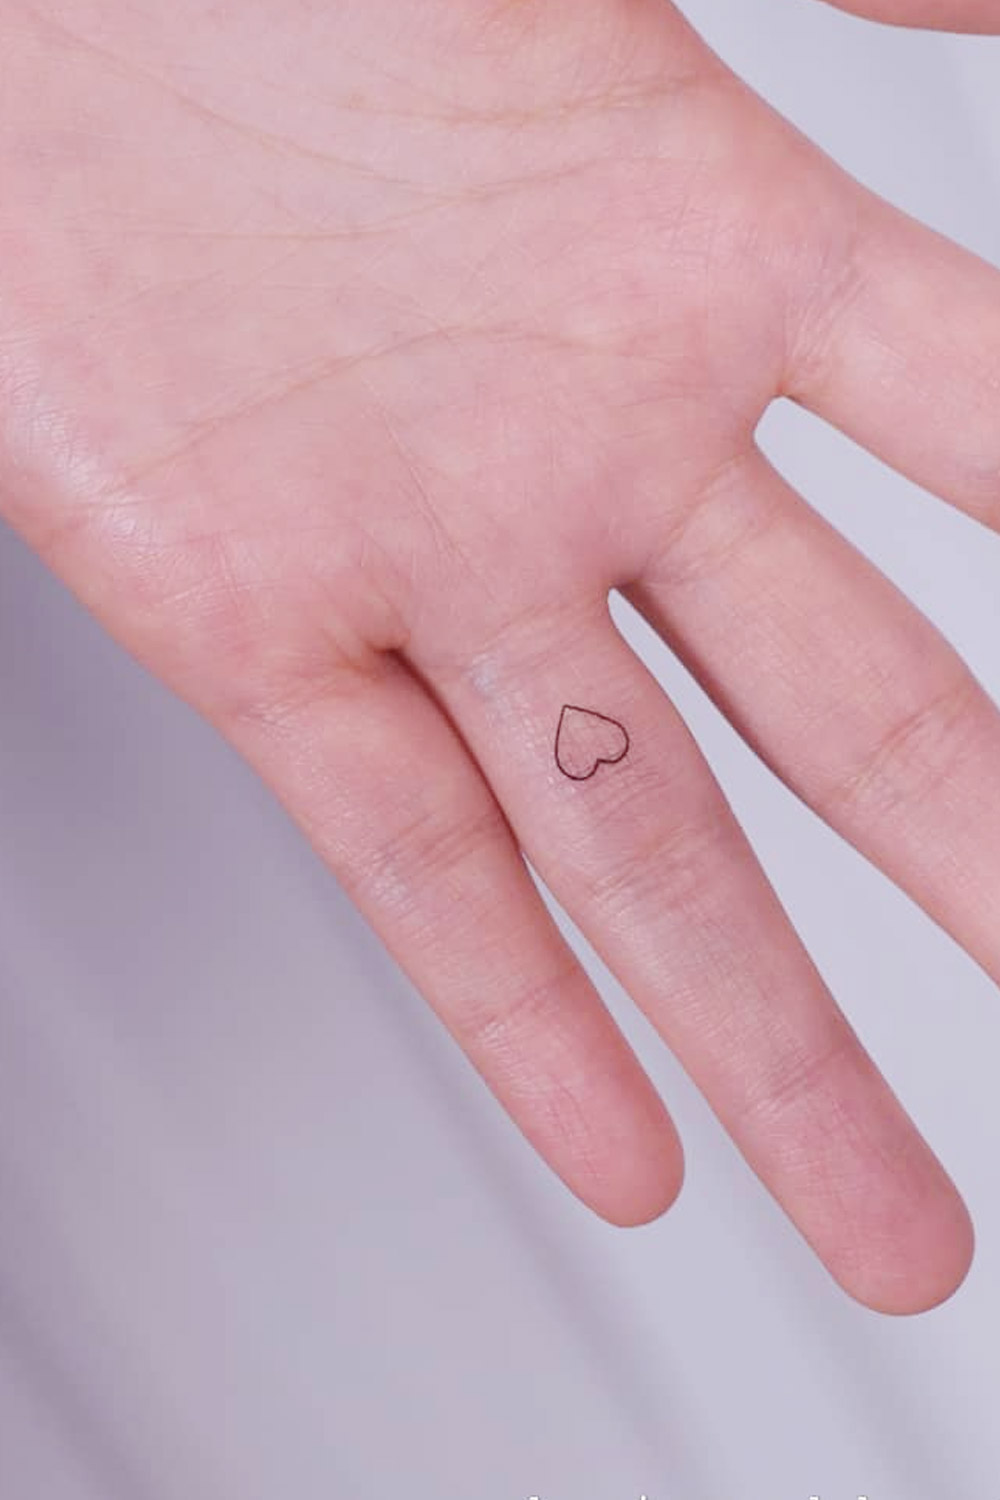 30 Simple and Small Finger Tattoos that You'll Want to Copy | Small finger  tattoos, Small tattoos simple, Small hand tattoos